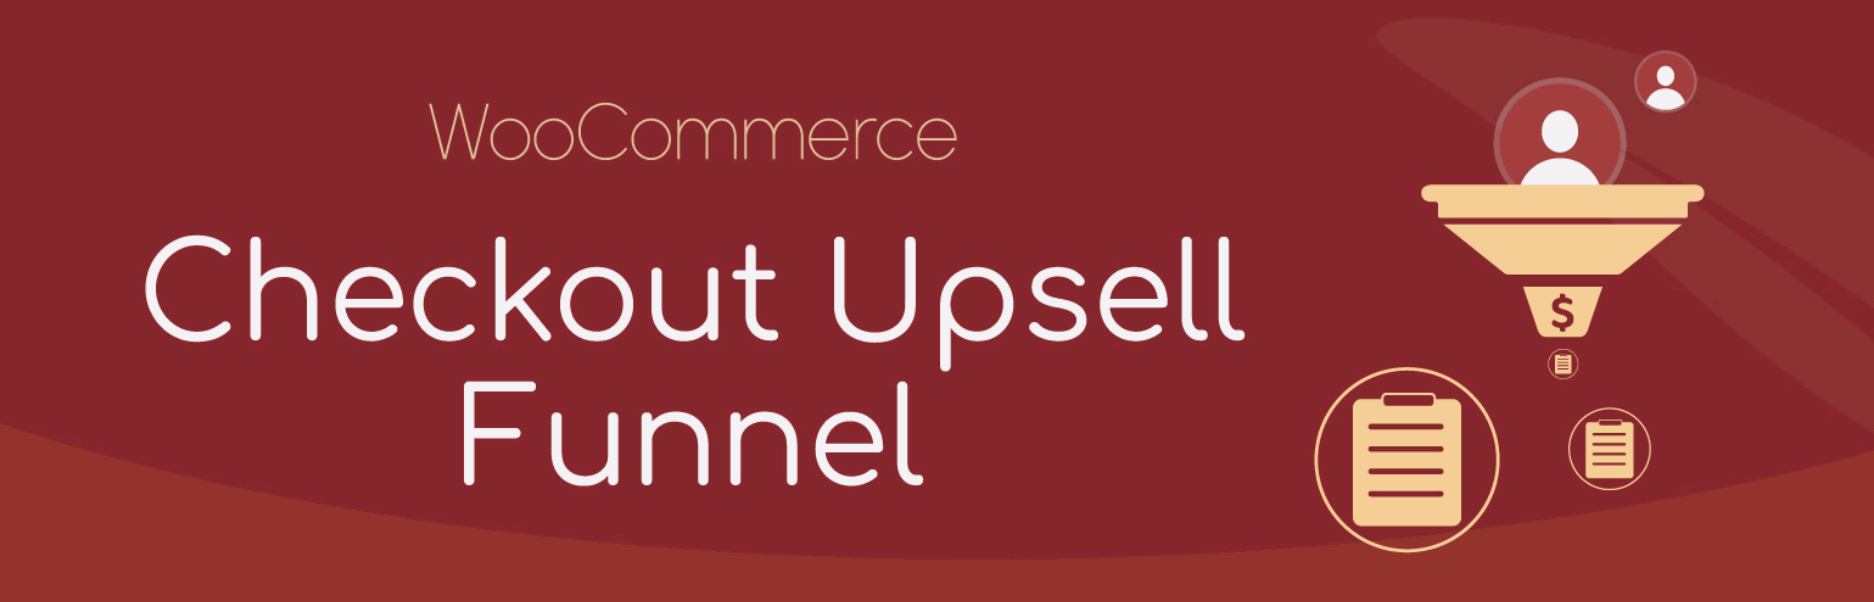 Checkout Upsell Funnel for WooCommerce 